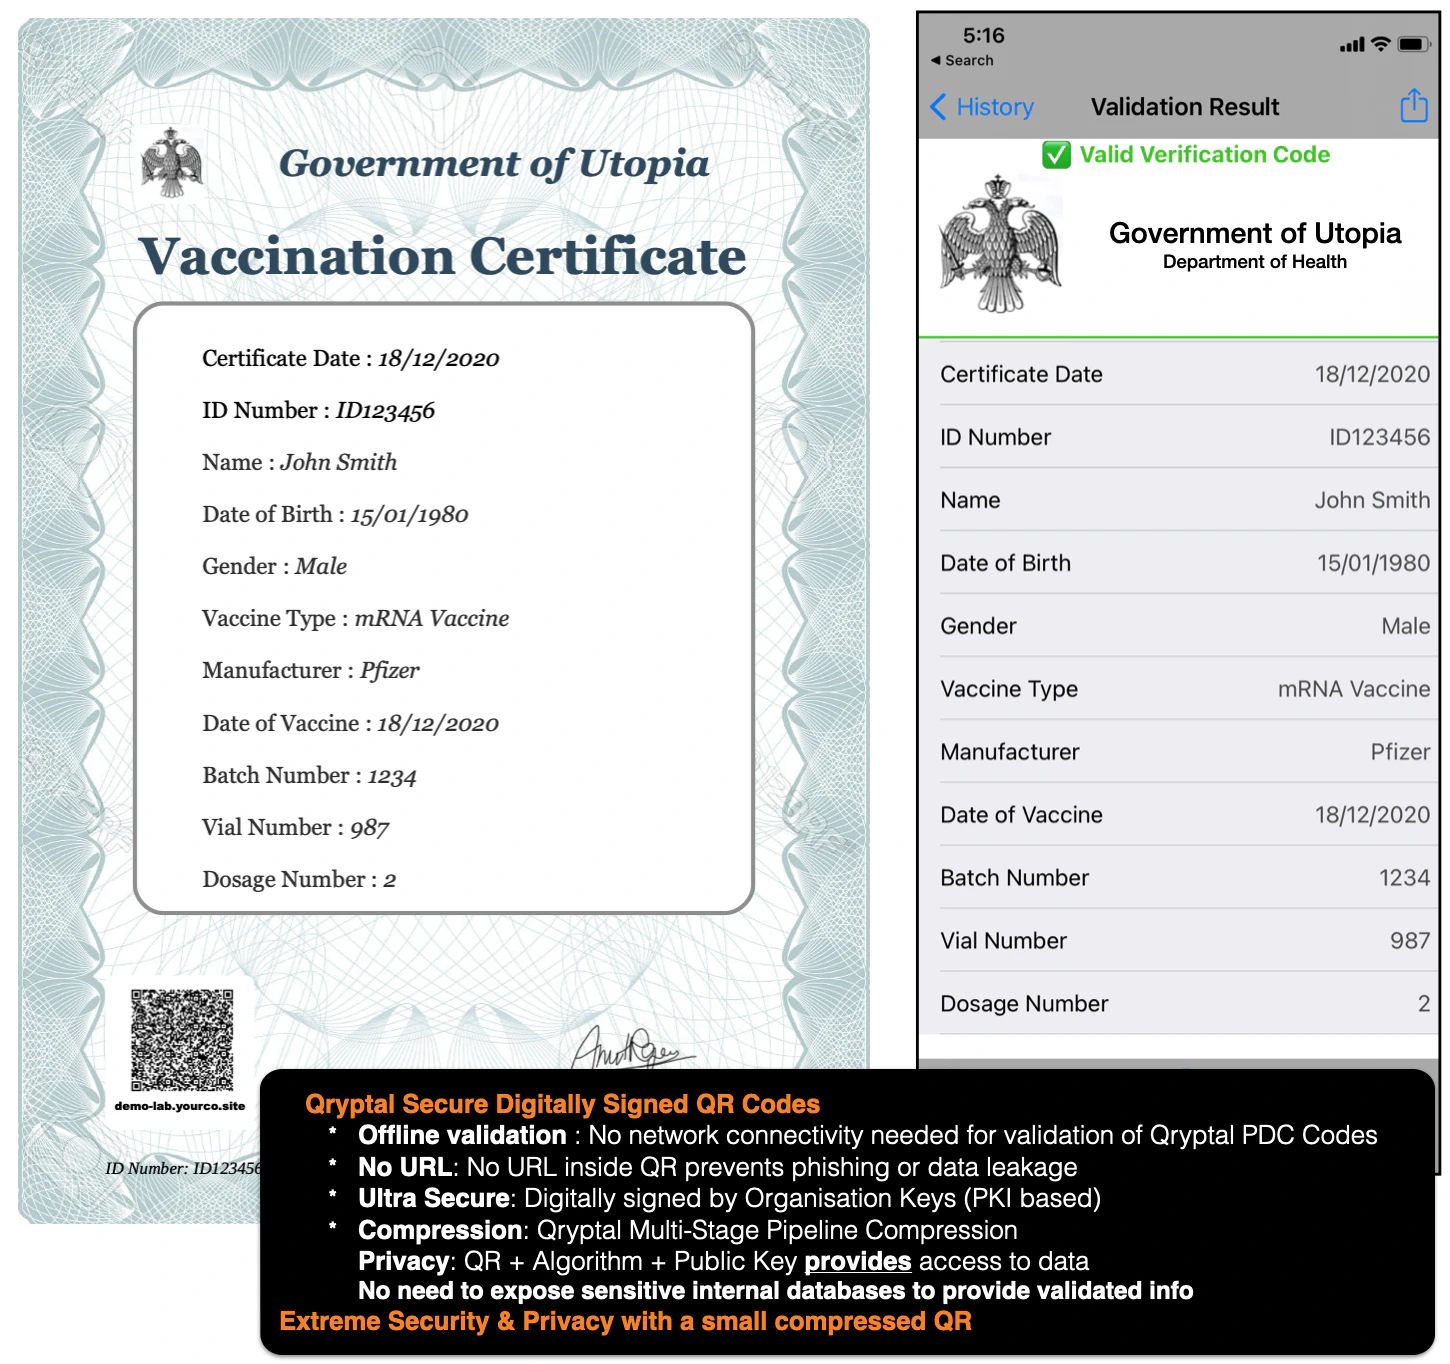 Sample Vaccination Certificate with secure QR code